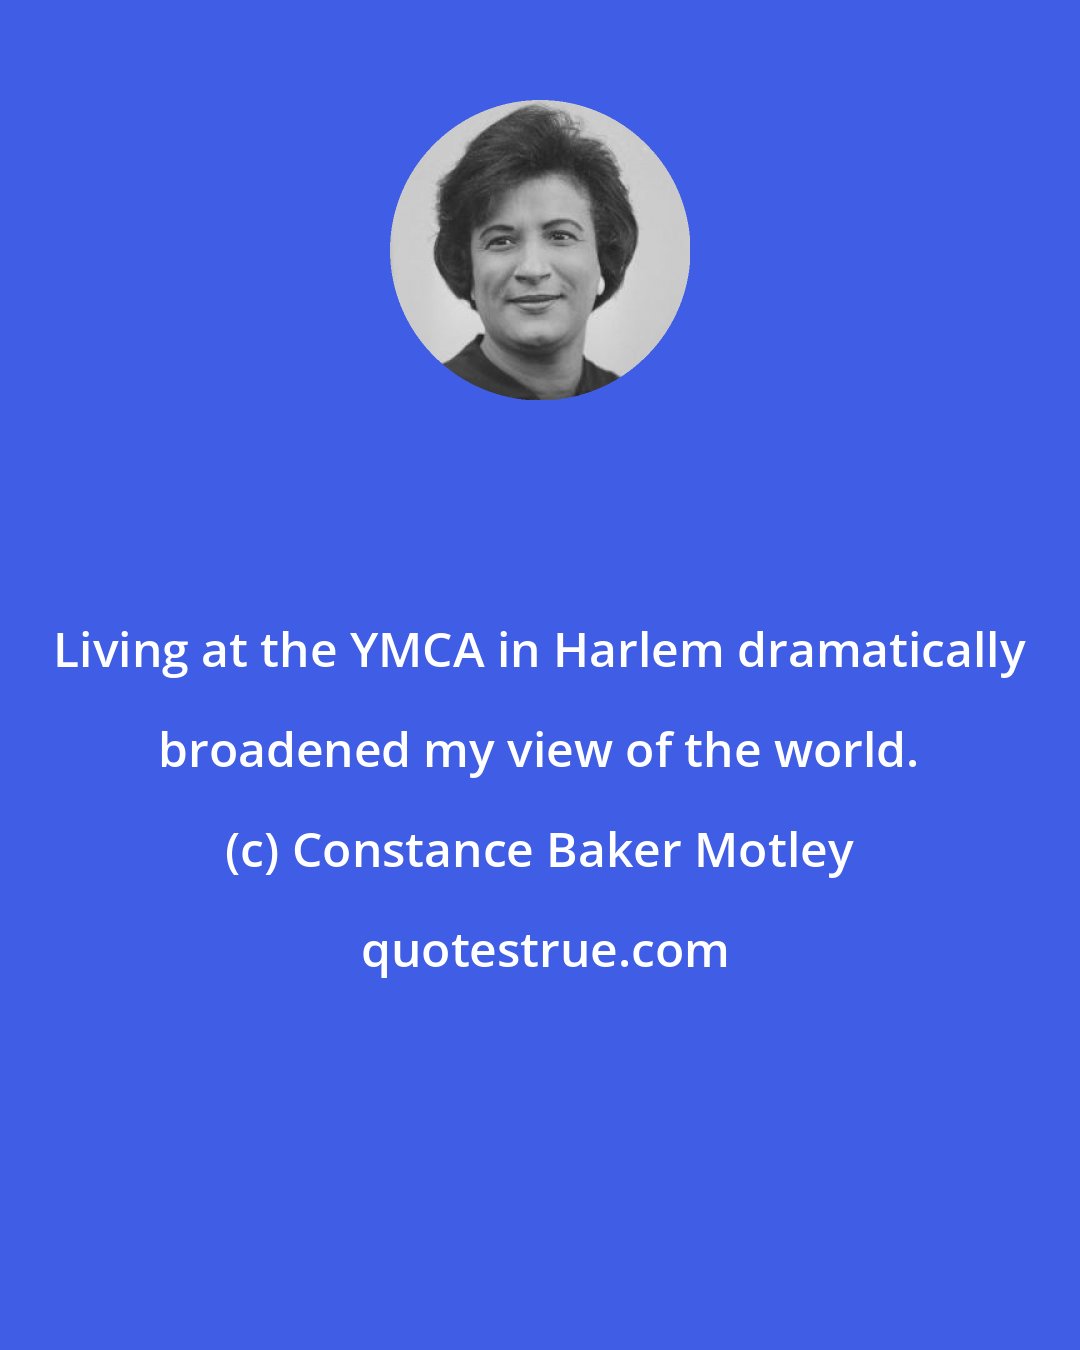 Constance Baker Motley: Living at the YMCA in Harlem dramatically broadened my view of the world.